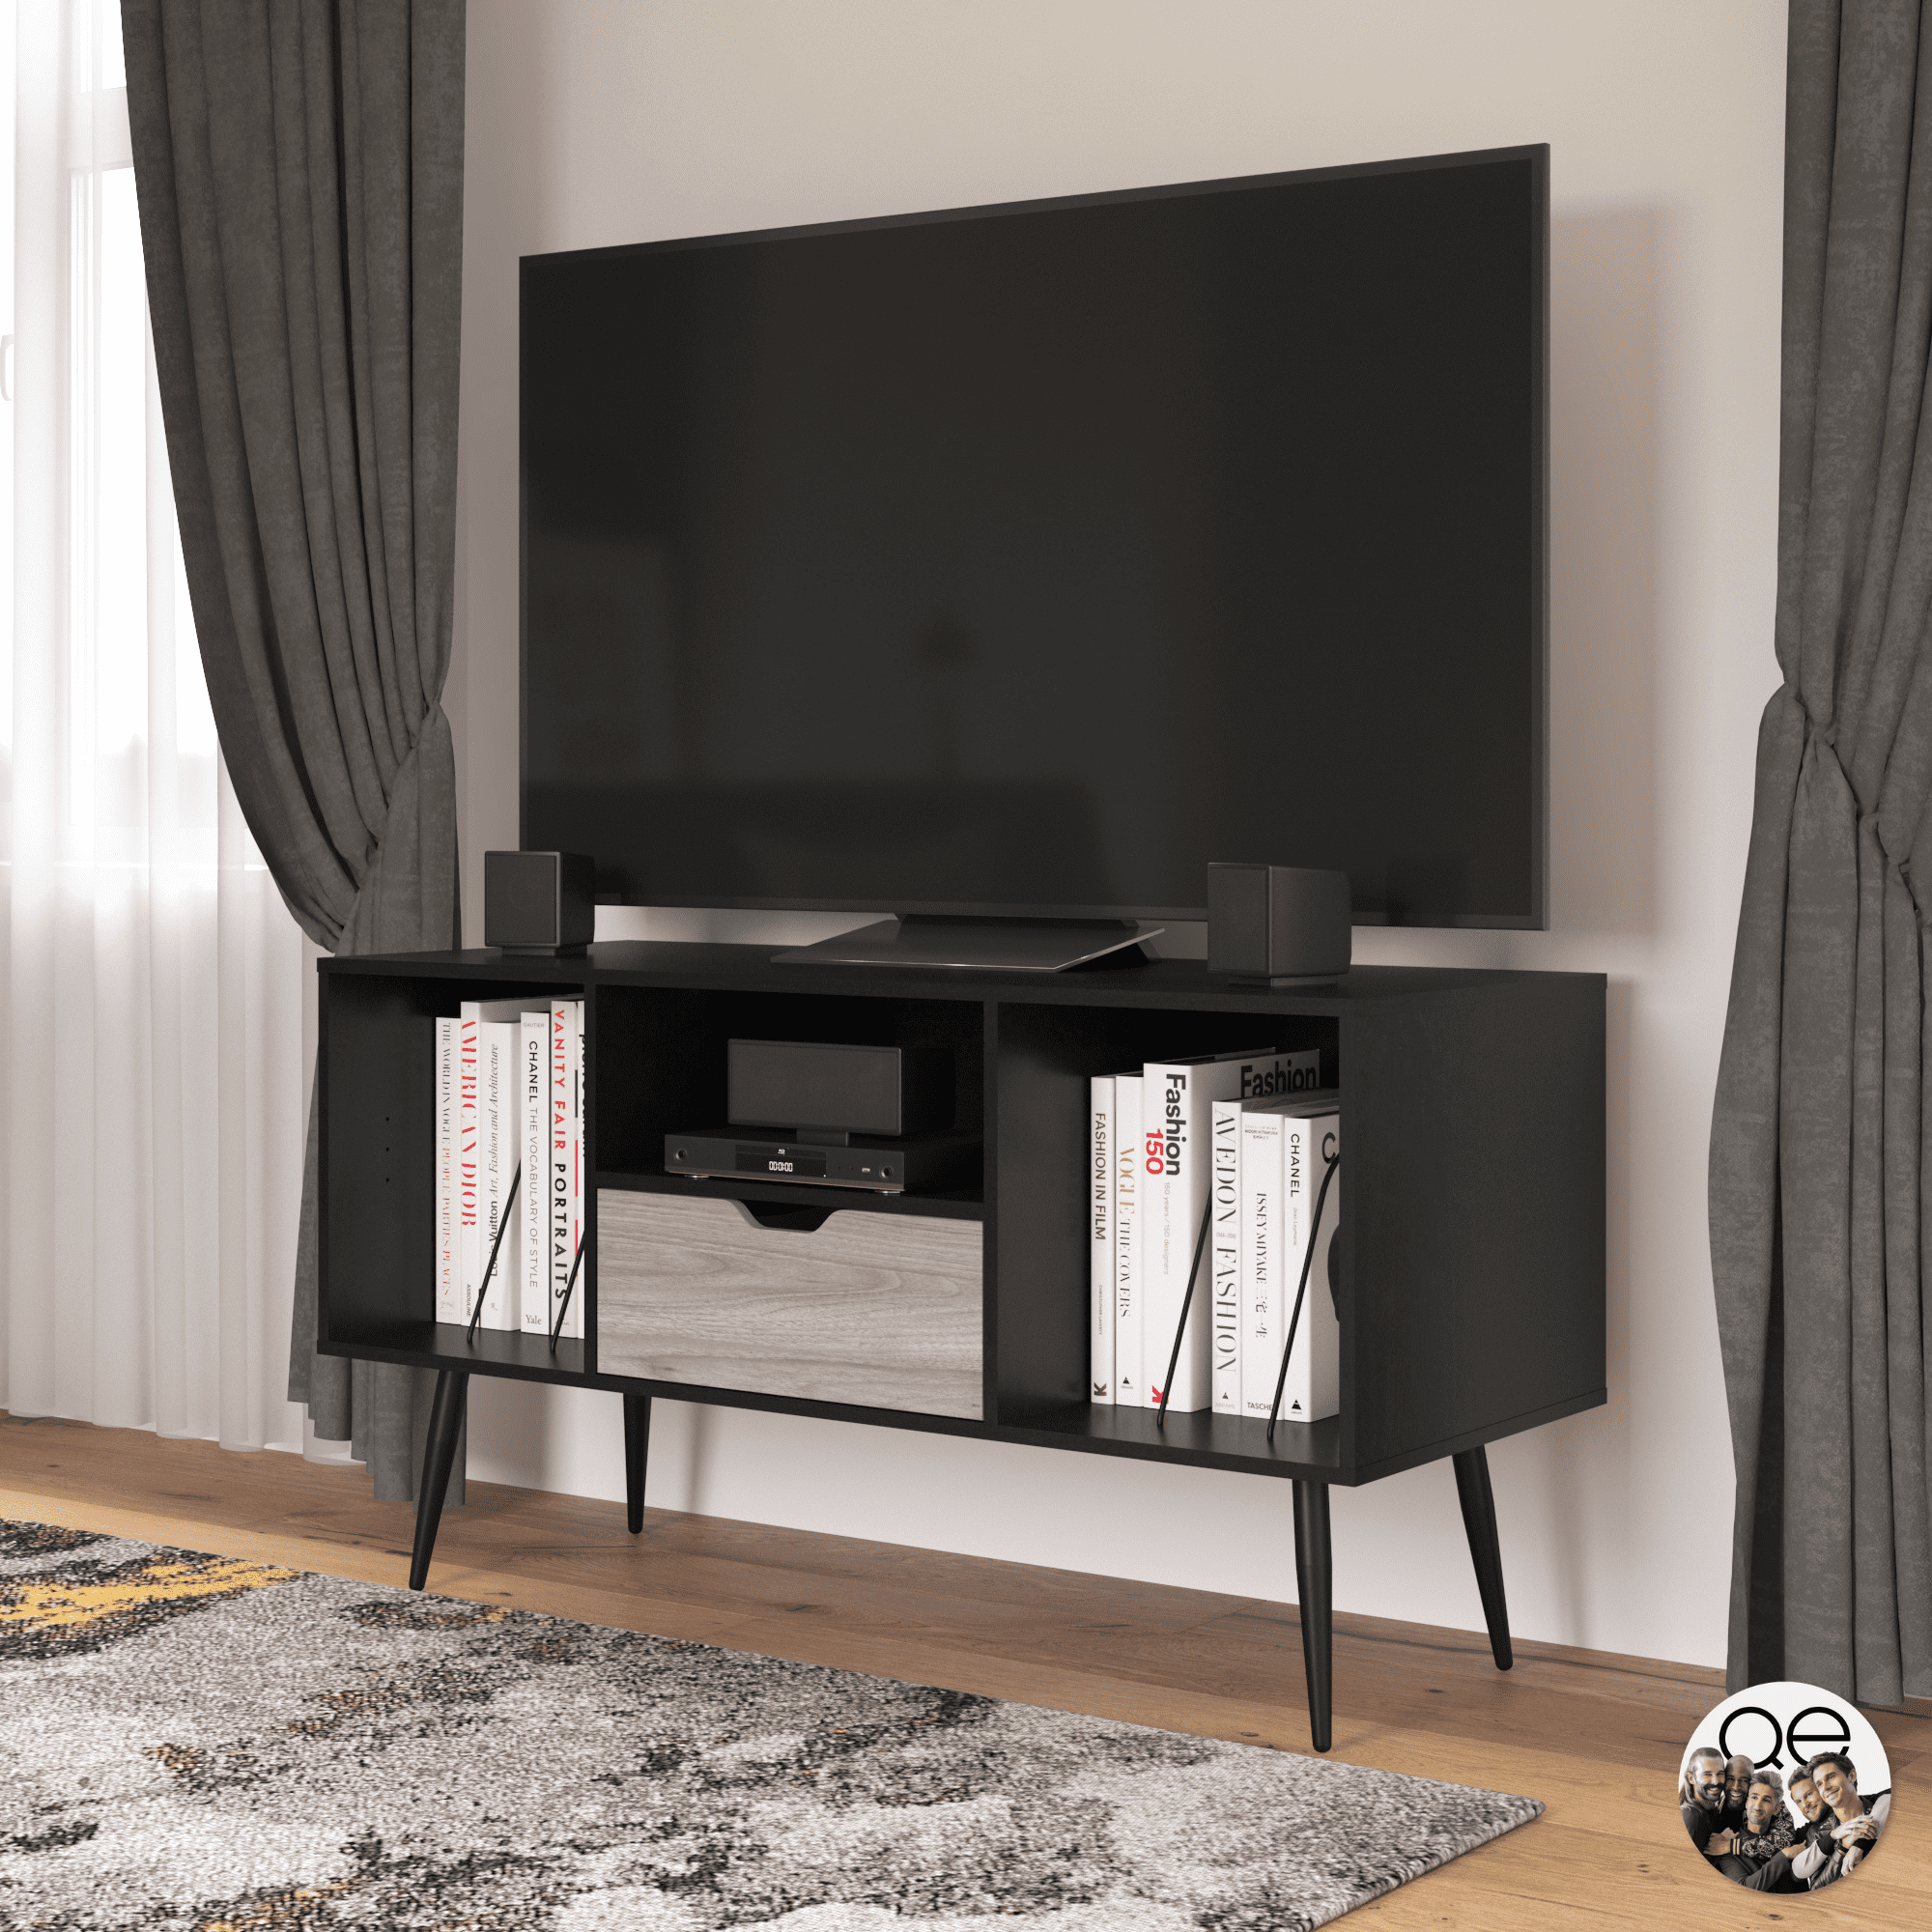 Mainstays Tv Stand For Tvs Up To 55, Mainstays 55 Tv Stand With Sliding Glass Doors